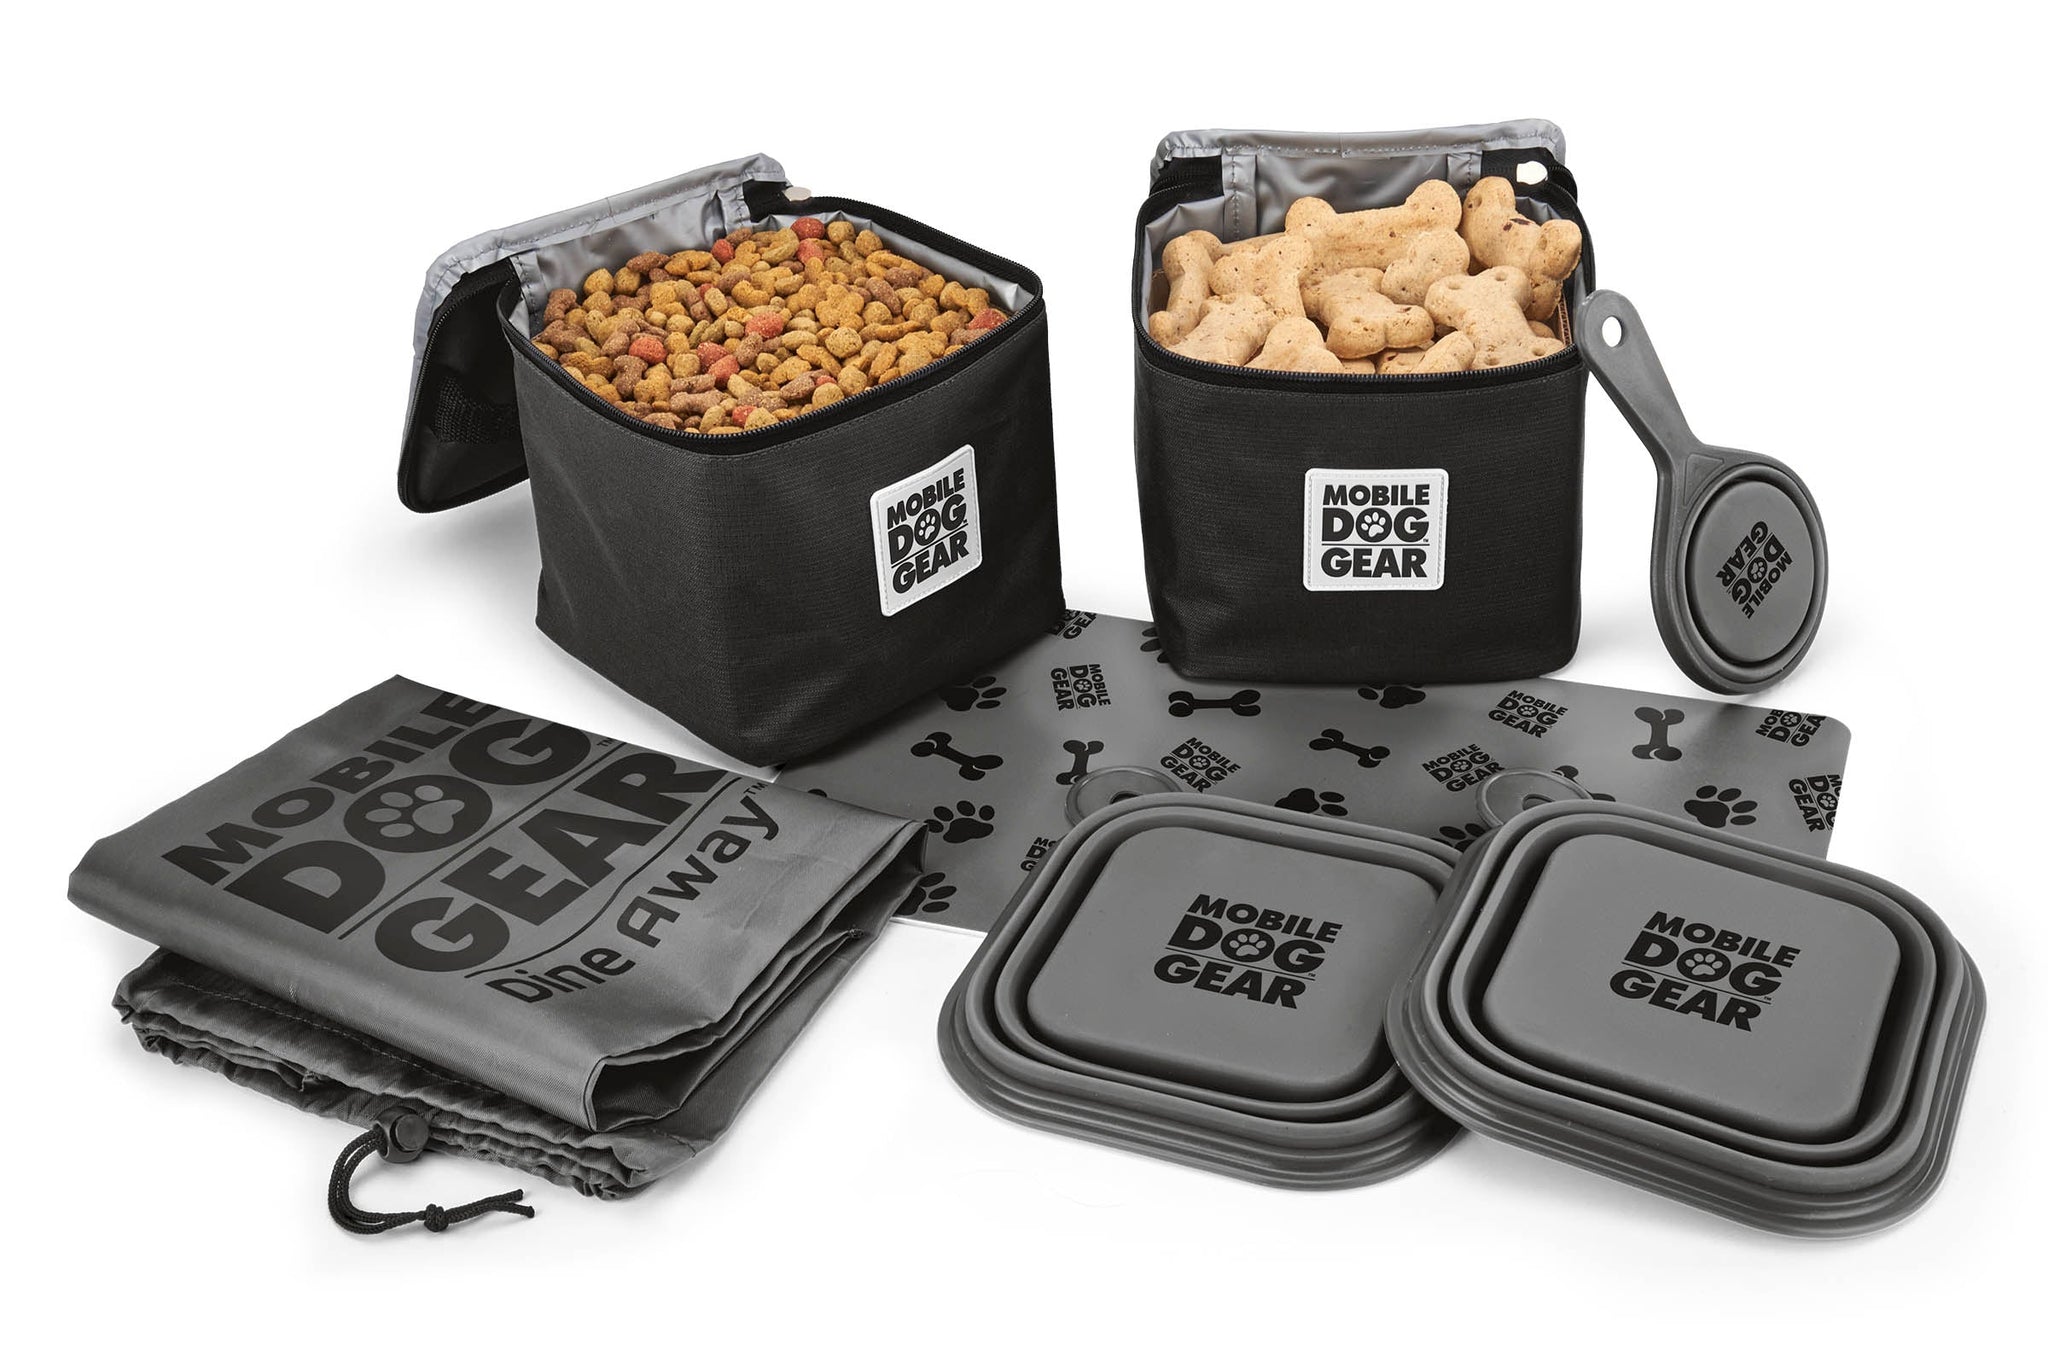 This highly functional lunch box for your dog features: two 15-cup lined food carriers, two 5-cup collapsible silicone dog bowls, collapsible silicone food scoop, non-slip placemat, and a drawstring bag which holds the entire set. Product is presented in black and accessories are in grey with black paw pattern.Product image shows the lunch box items flat, as they come out of the bag. 